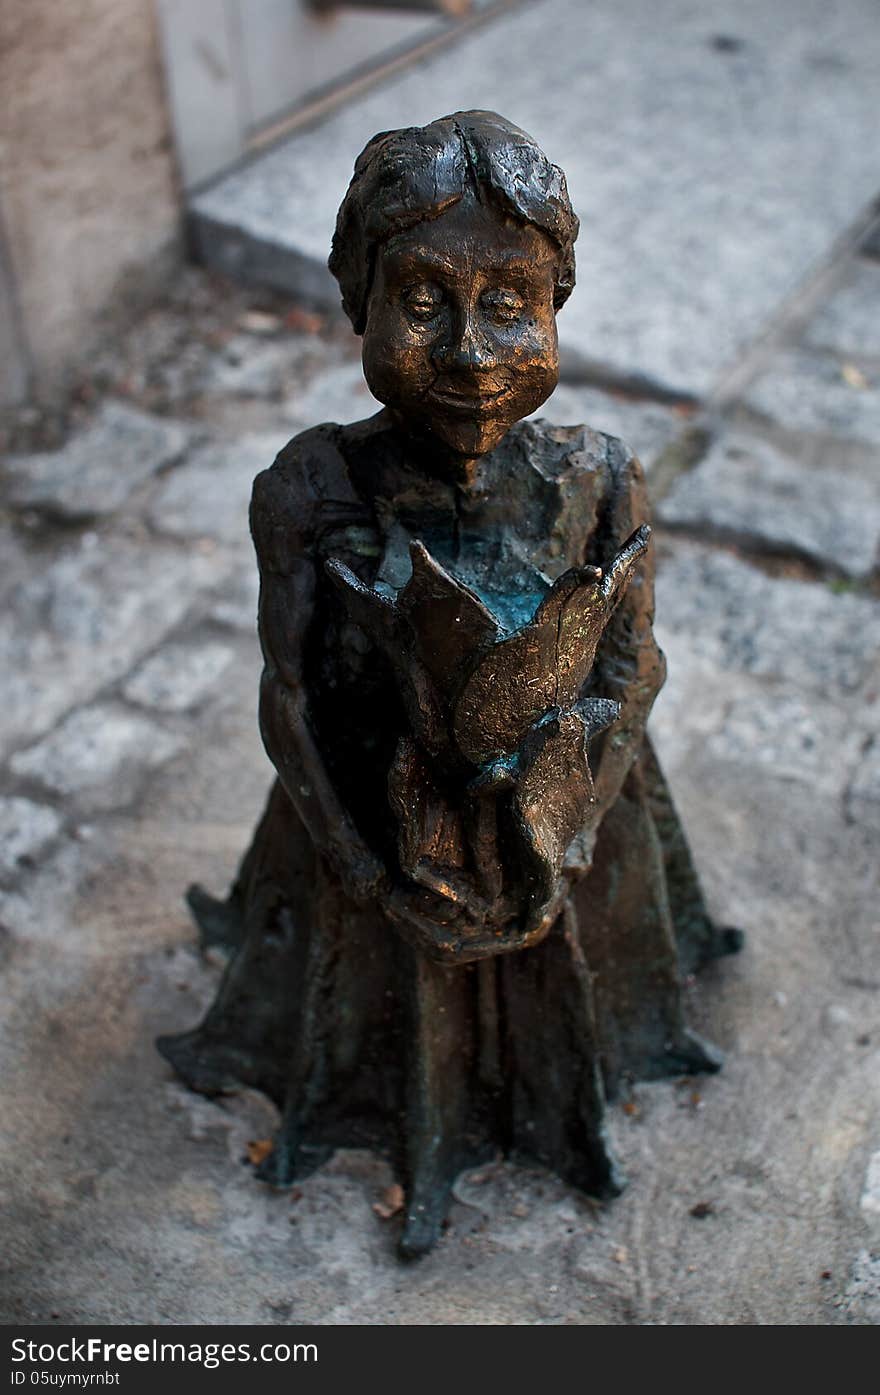 Symbol of Wroclaw, brass dwarf. There are more than 230 in the city and still they come!. Symbol of Wroclaw, brass dwarf. There are more than 230 in the city and still they come!